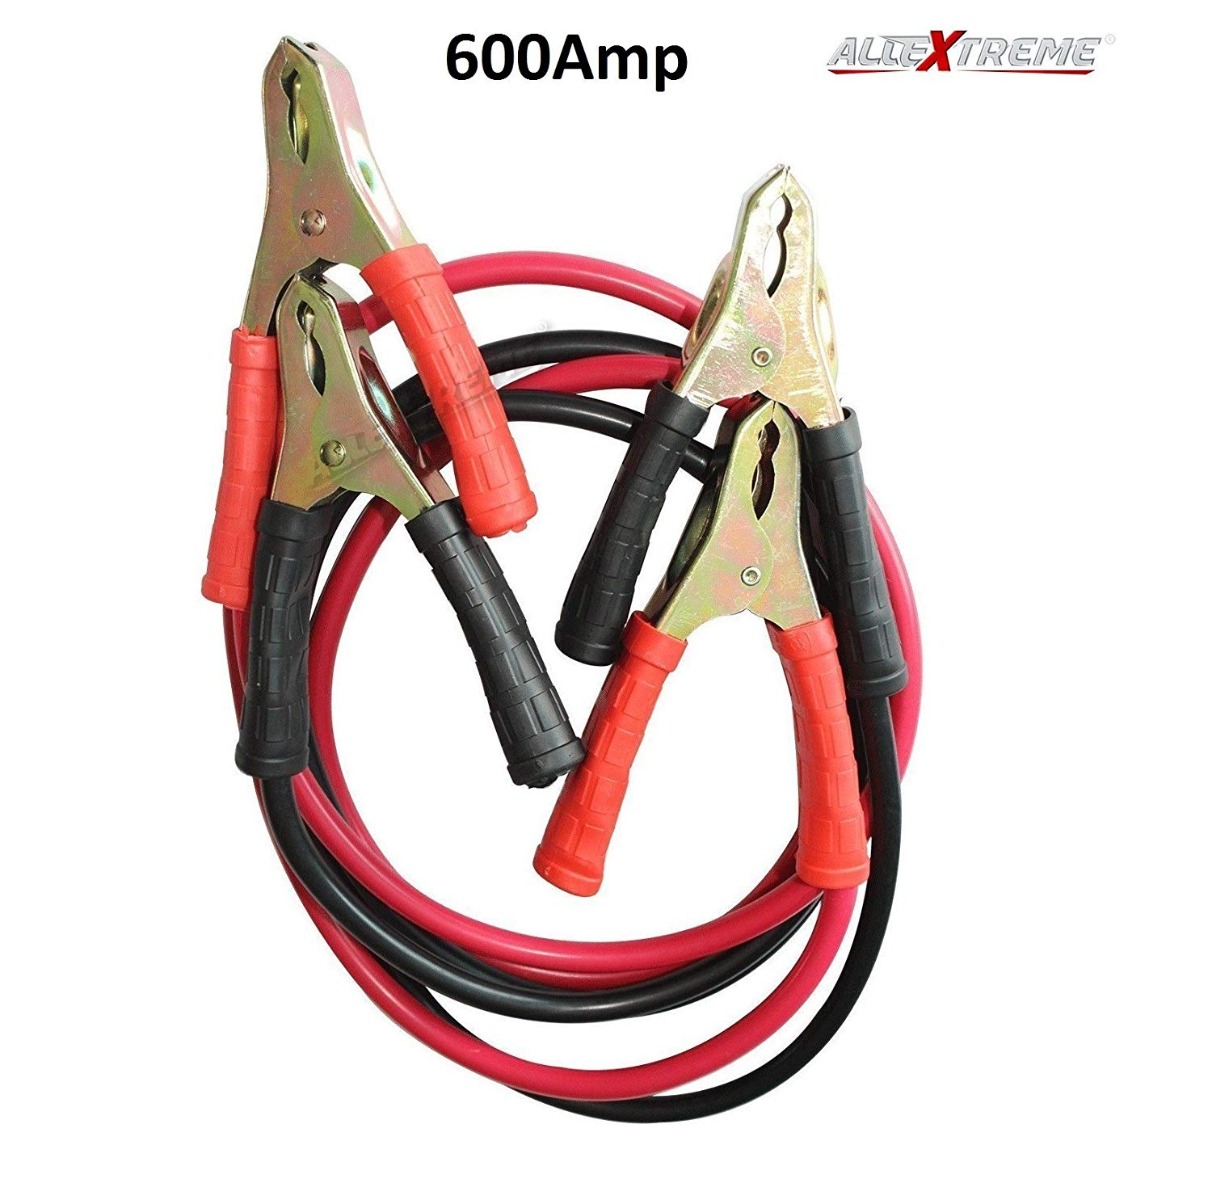 600 Amp Car Battery Jumper Cable